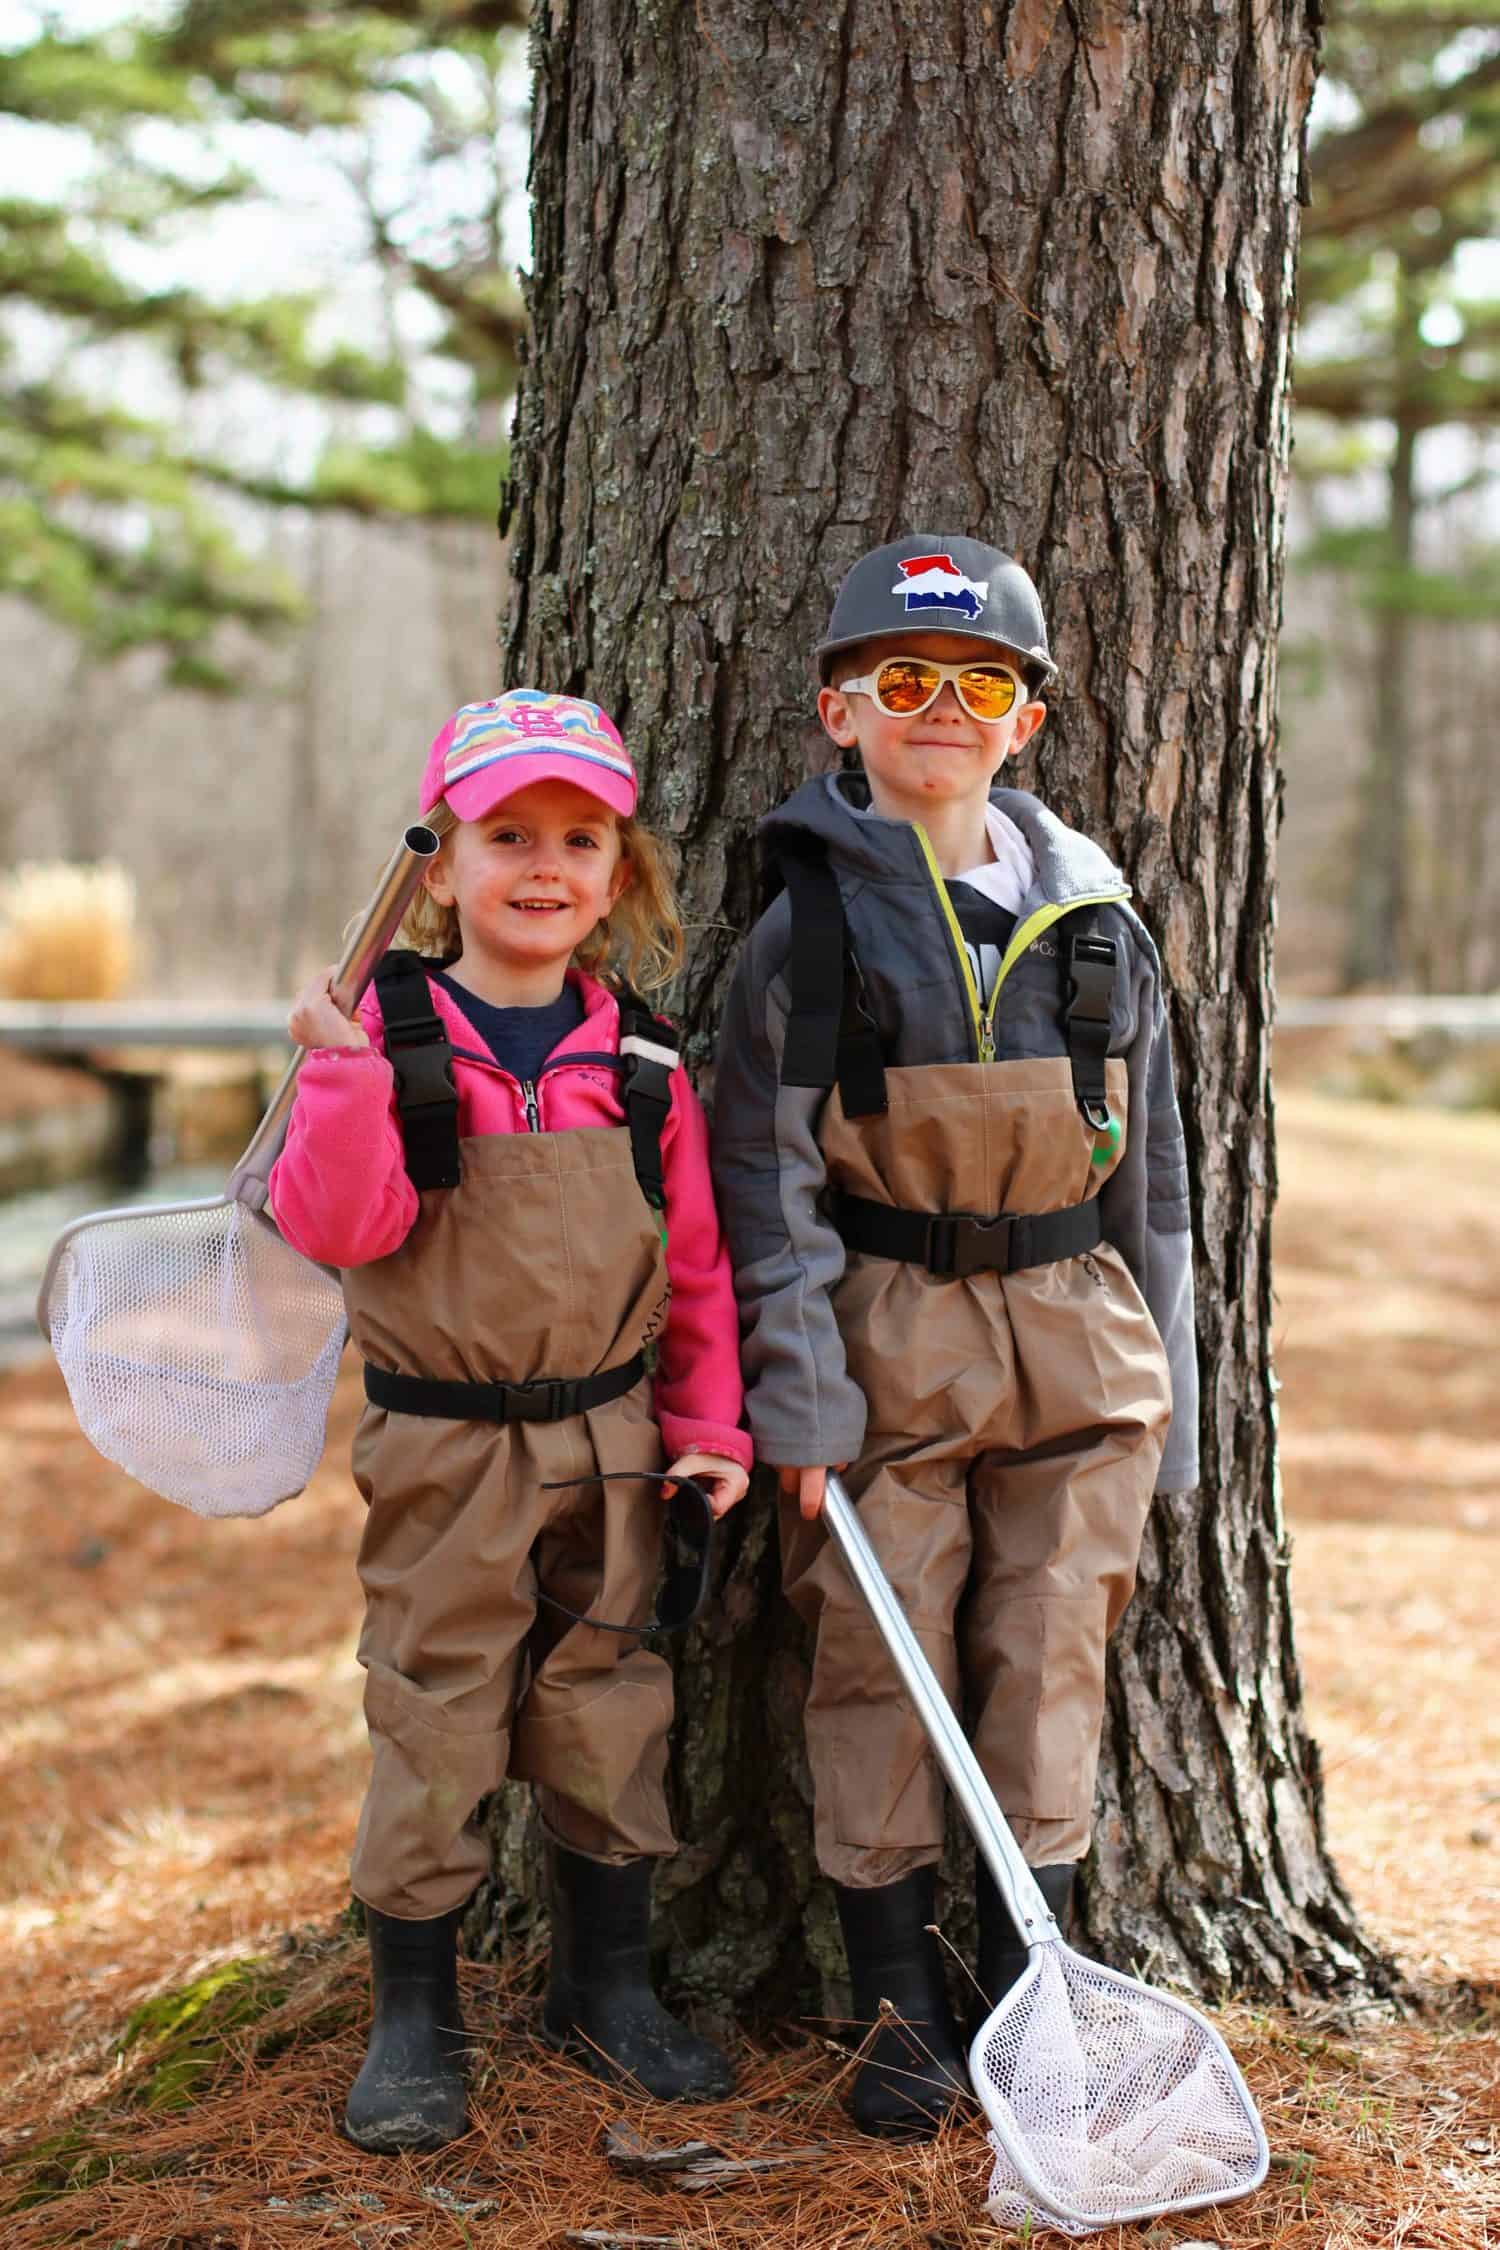 awesome gift ideas for outdoor kids - fishing waders